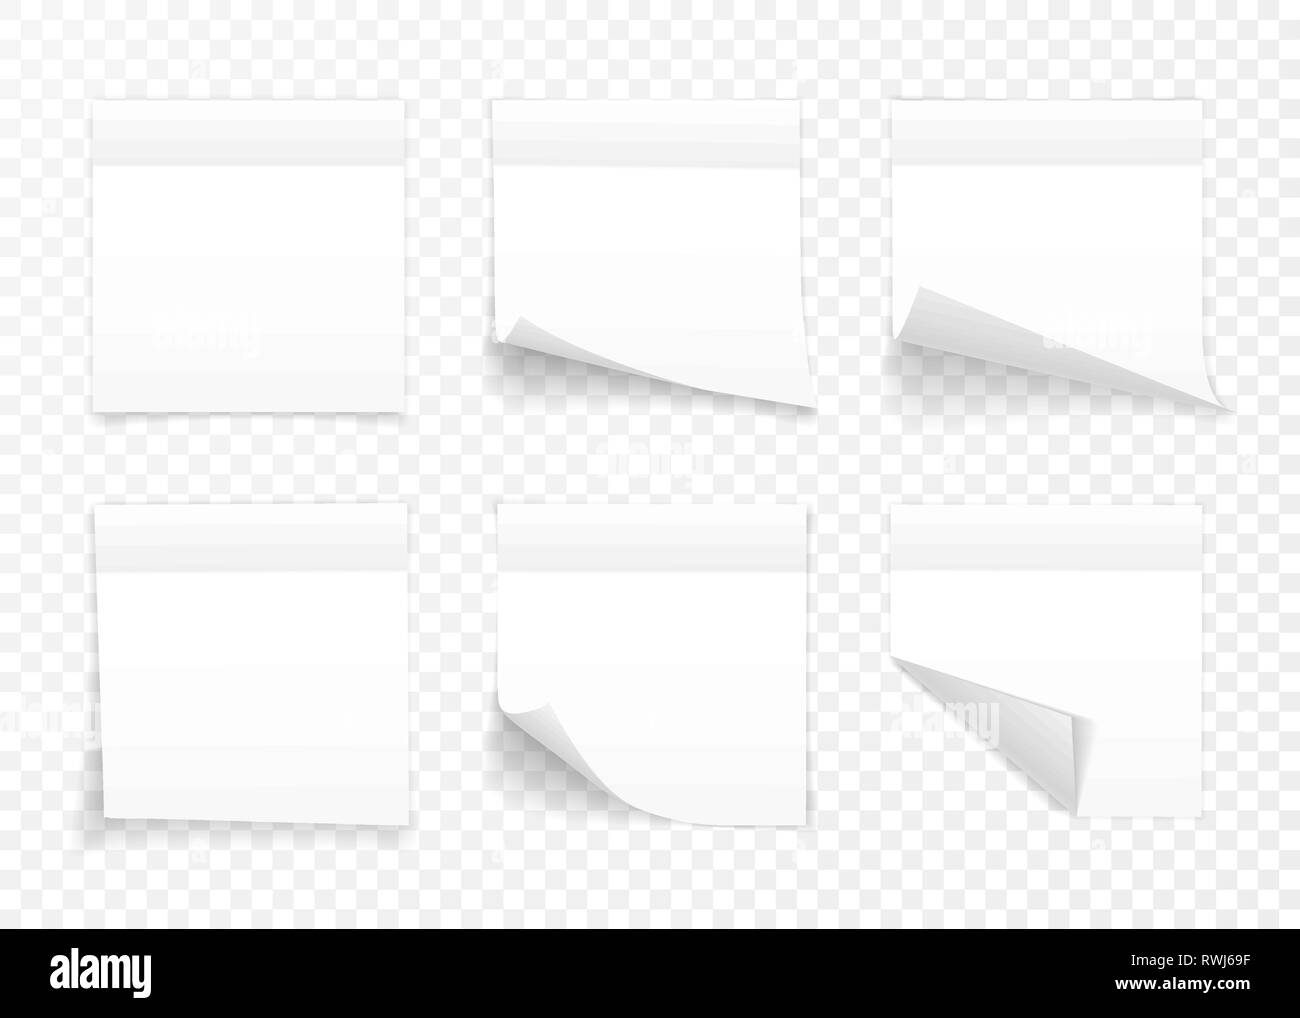 Blank post it notes Black and White Stock Photos & Images - Alamy